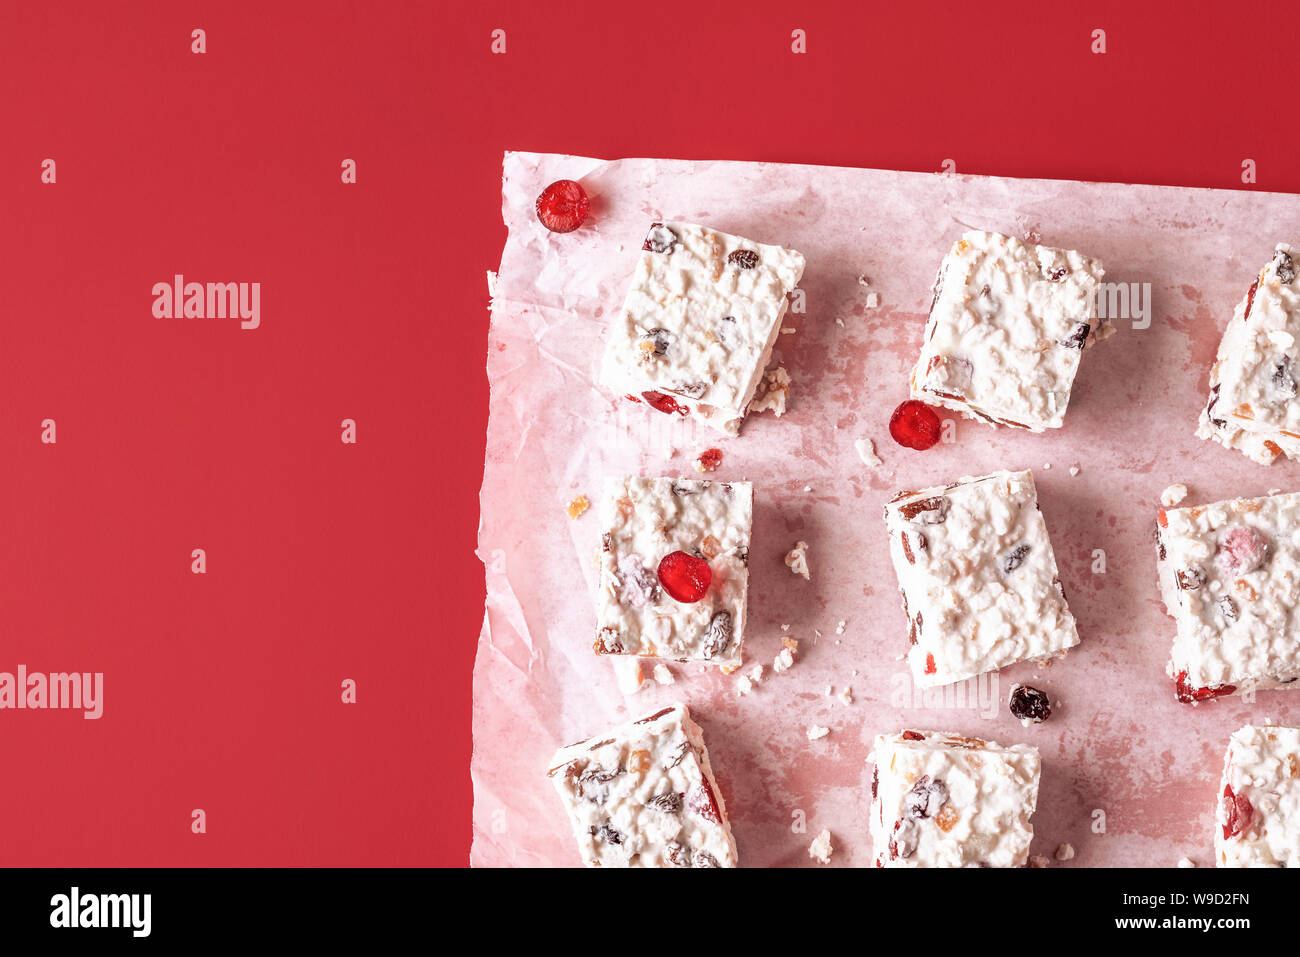 Australian Christmas dessert with dried fruits and coconut, cut in pieces, on red background. Flat lay of white cake with rice. Traditional Xmas food Stock Photo